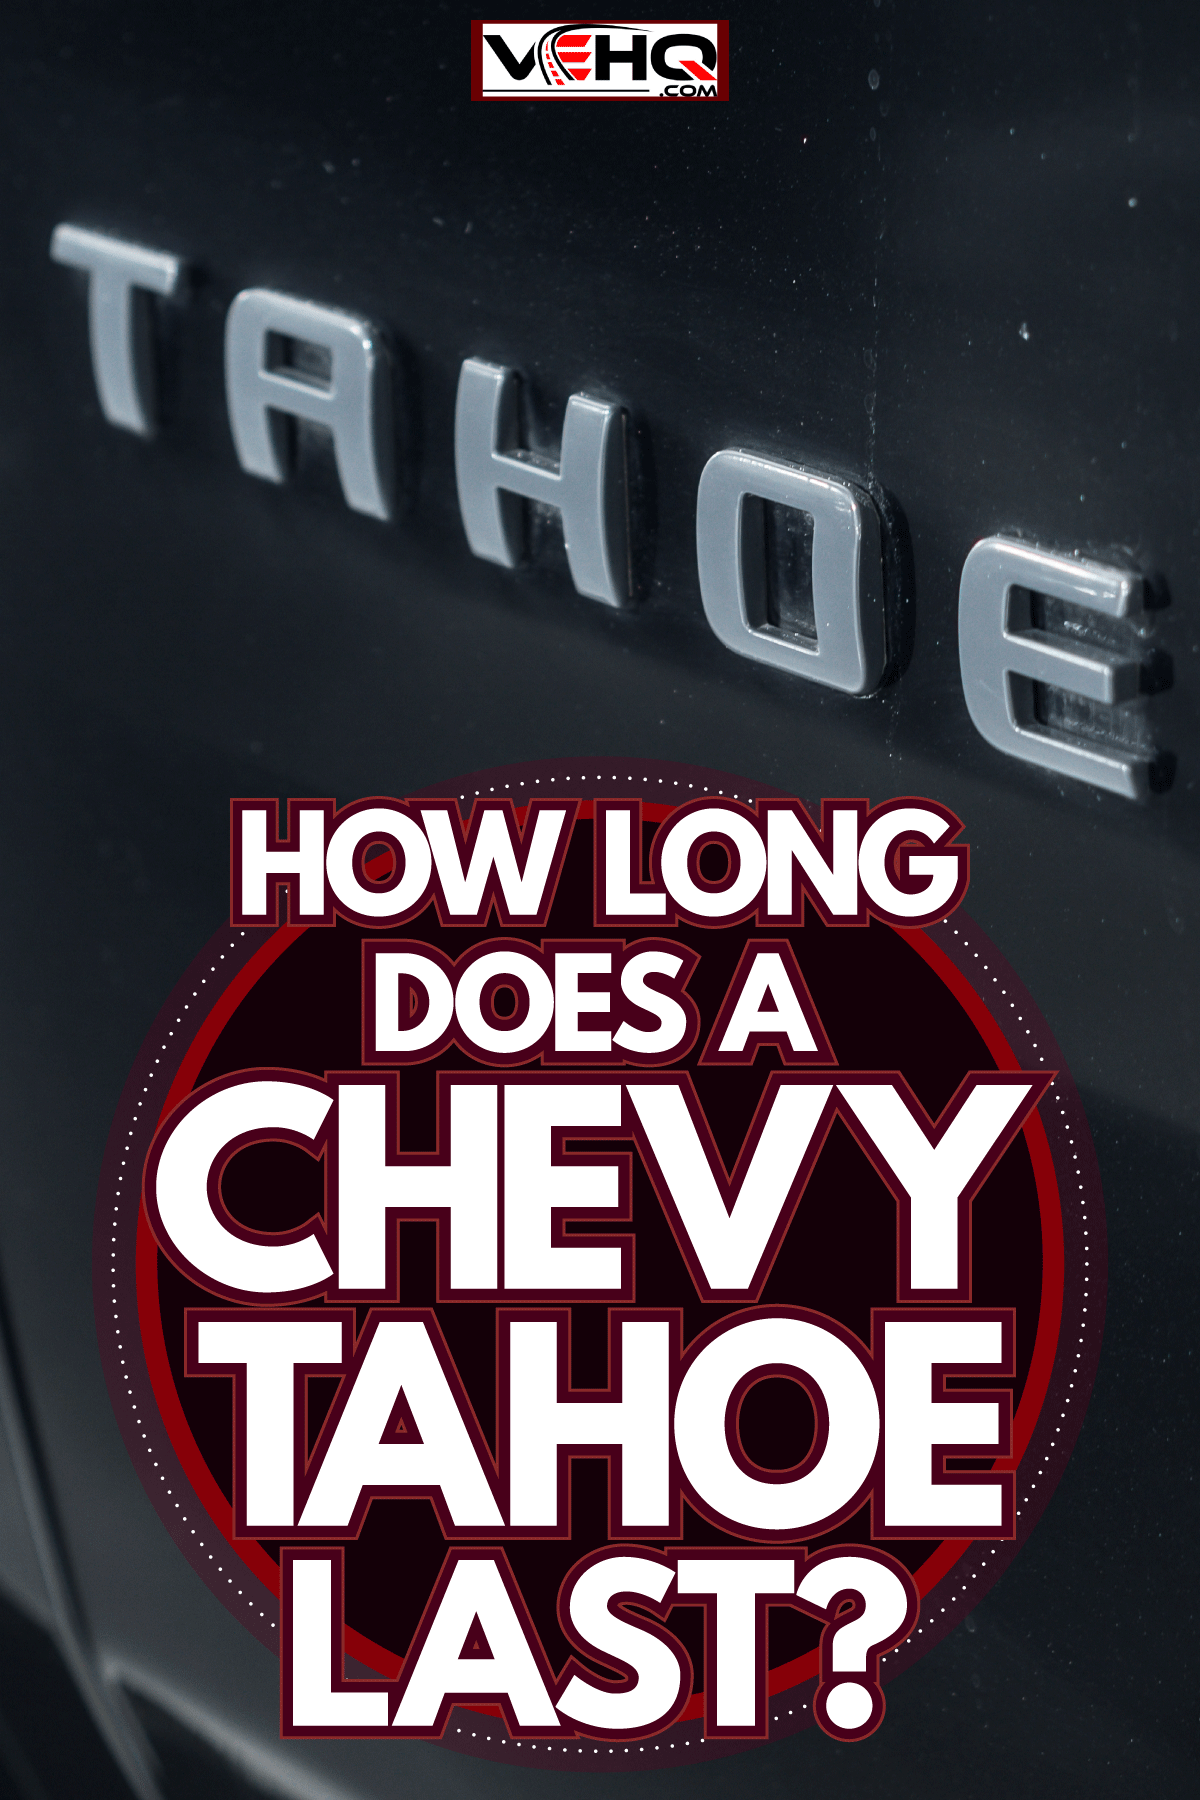 Tahoe emblem on the driver side door, How Long Does A Chevy Tahoe Last?